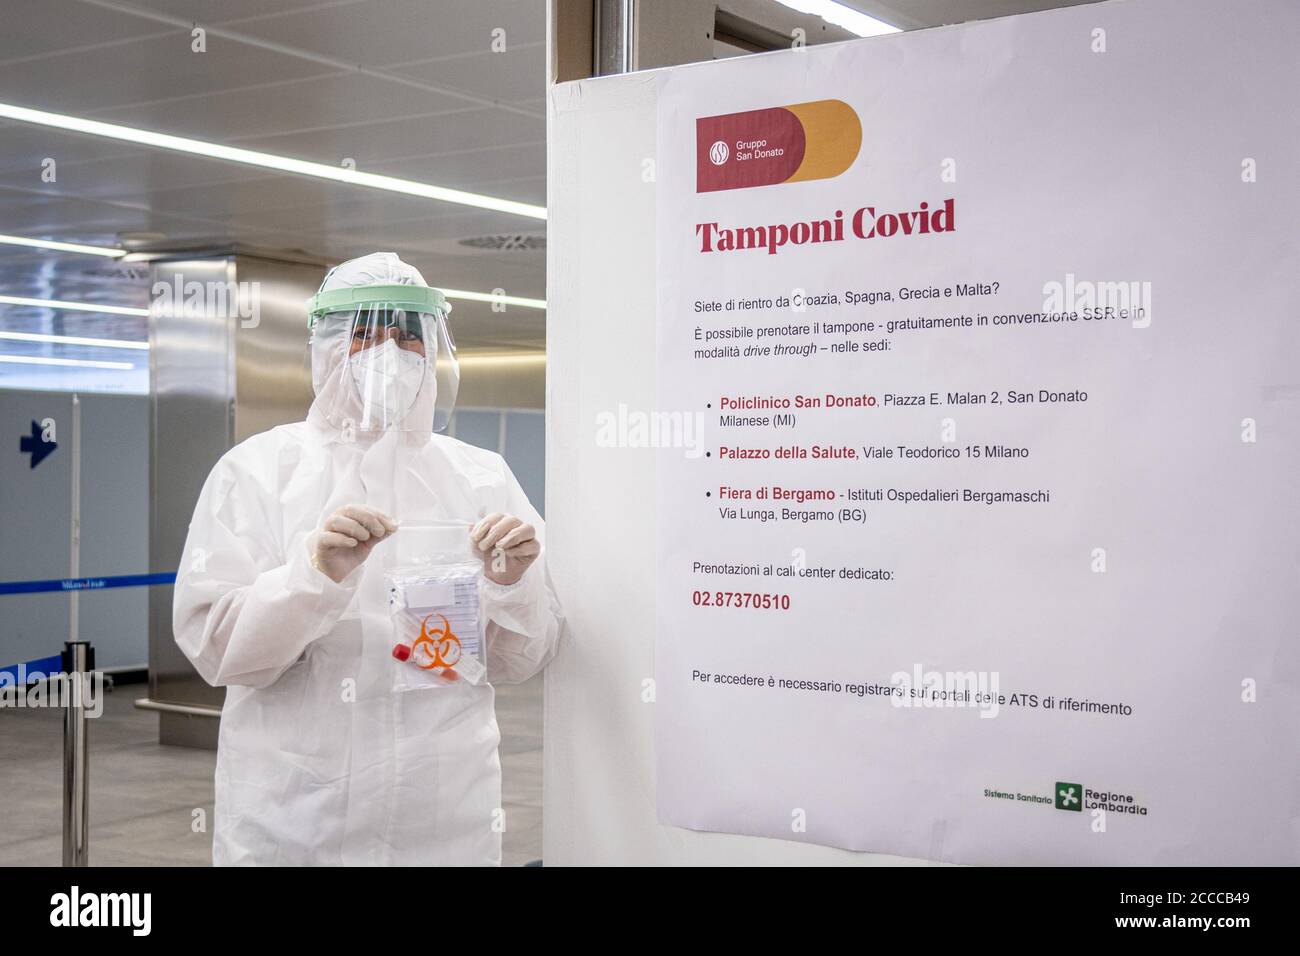 Milan - COVID-19 - First day of Tamponi at Linate Airport for flights  arriving from Croatia, Greece, Malta and Spain. Test area, San Donato  hospital staff with protective suit and PPE Editorial